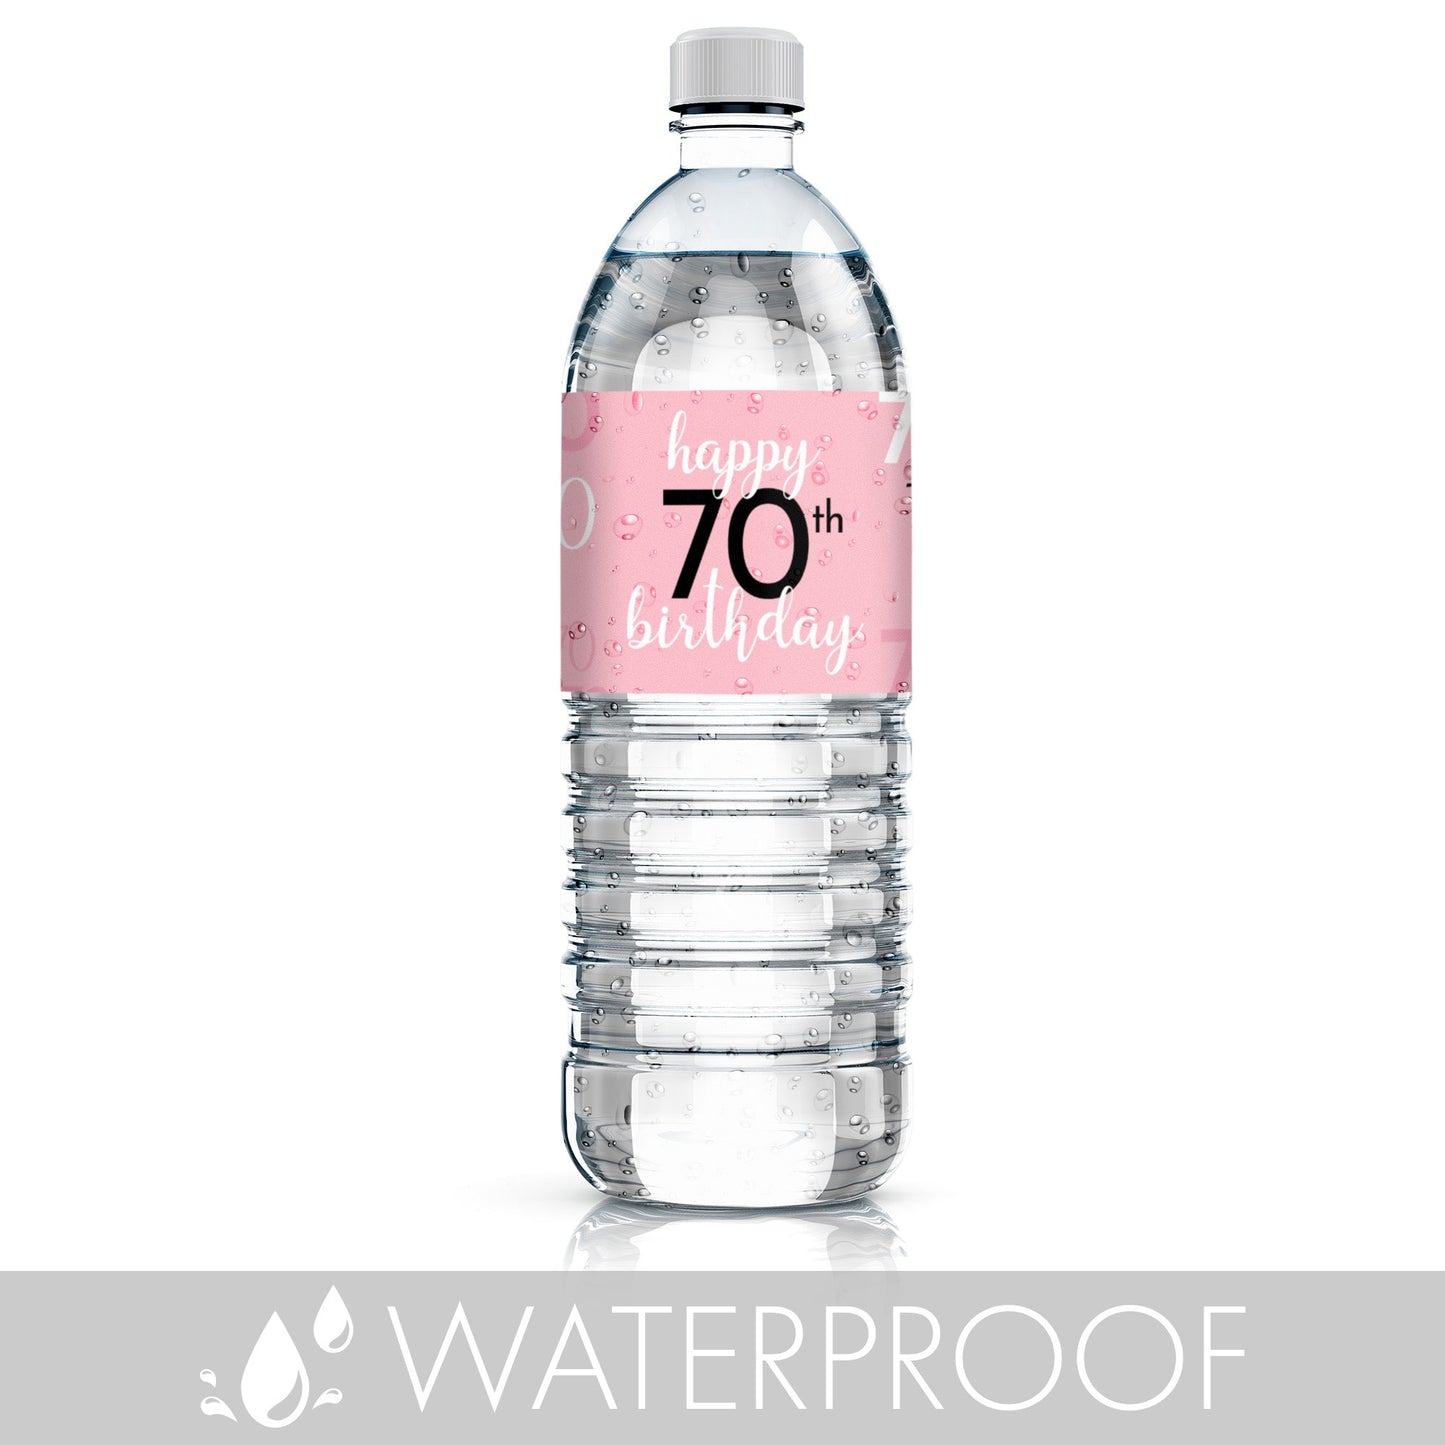 Personalize your water bottles with waterproof labels in a stylish 70th pink and black design